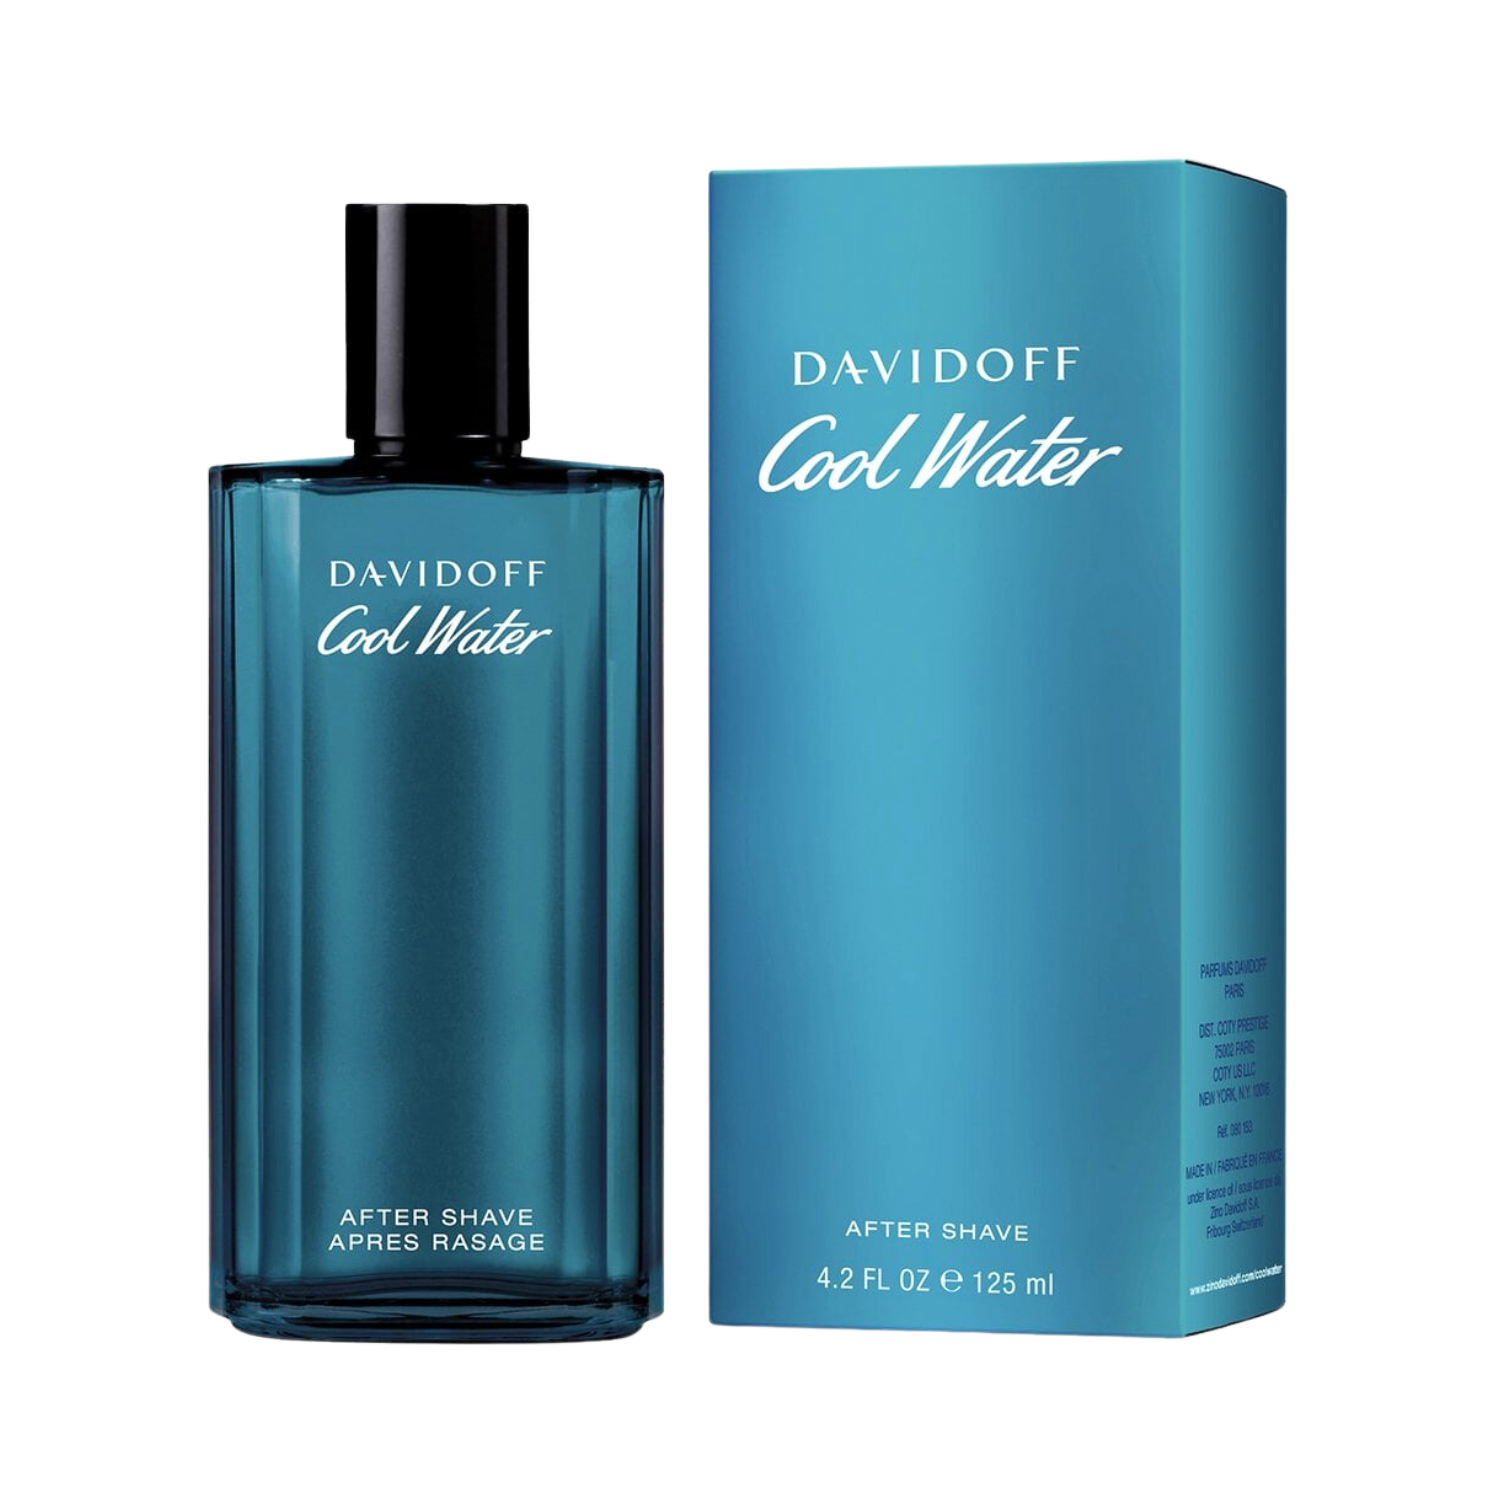 davidoff-cool-water-after-shave-125ml